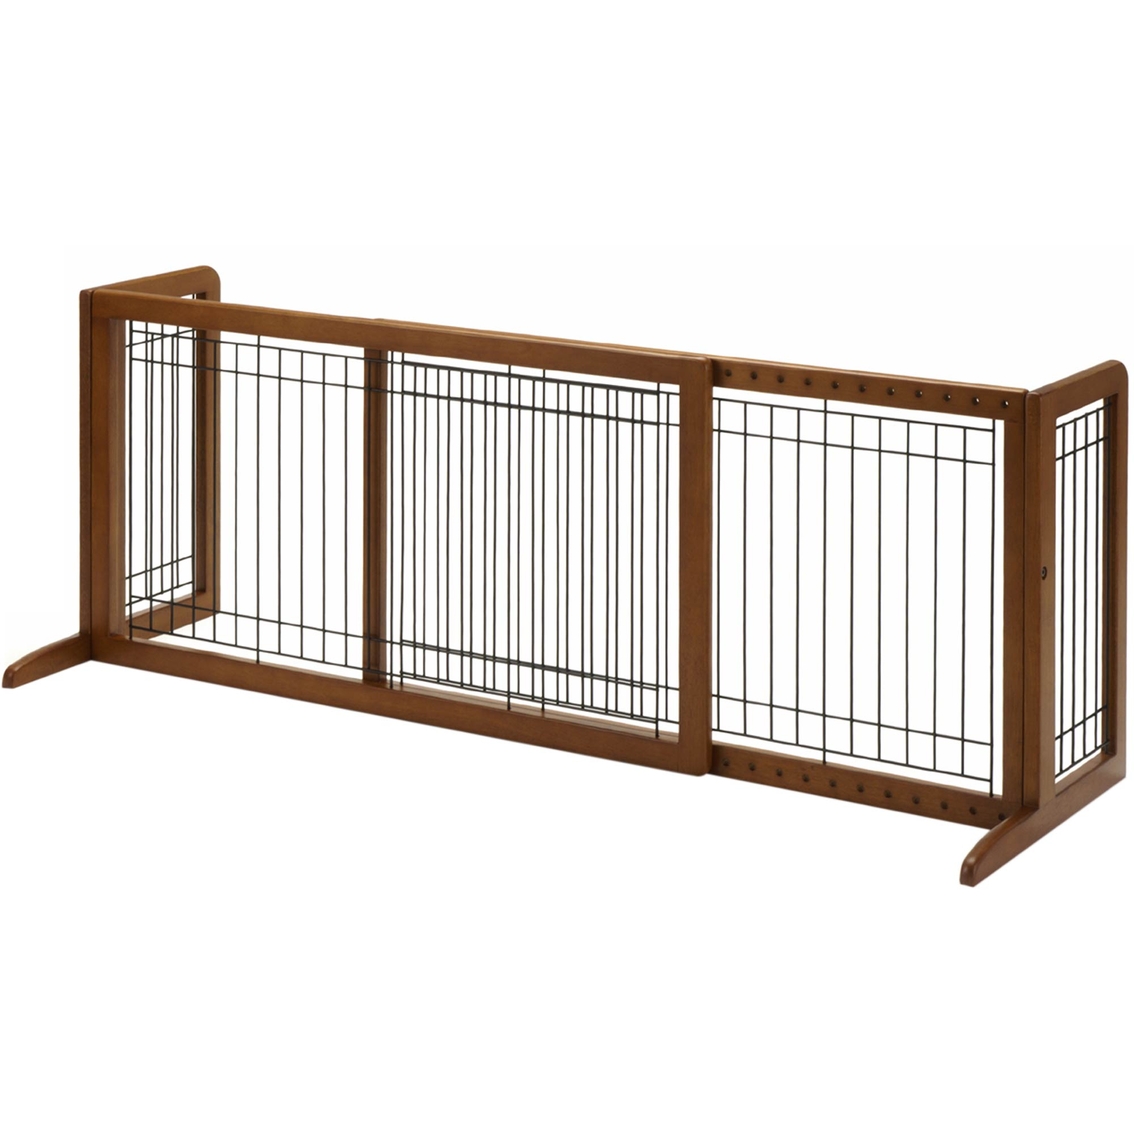 Richell Expandable Freestanding Gate